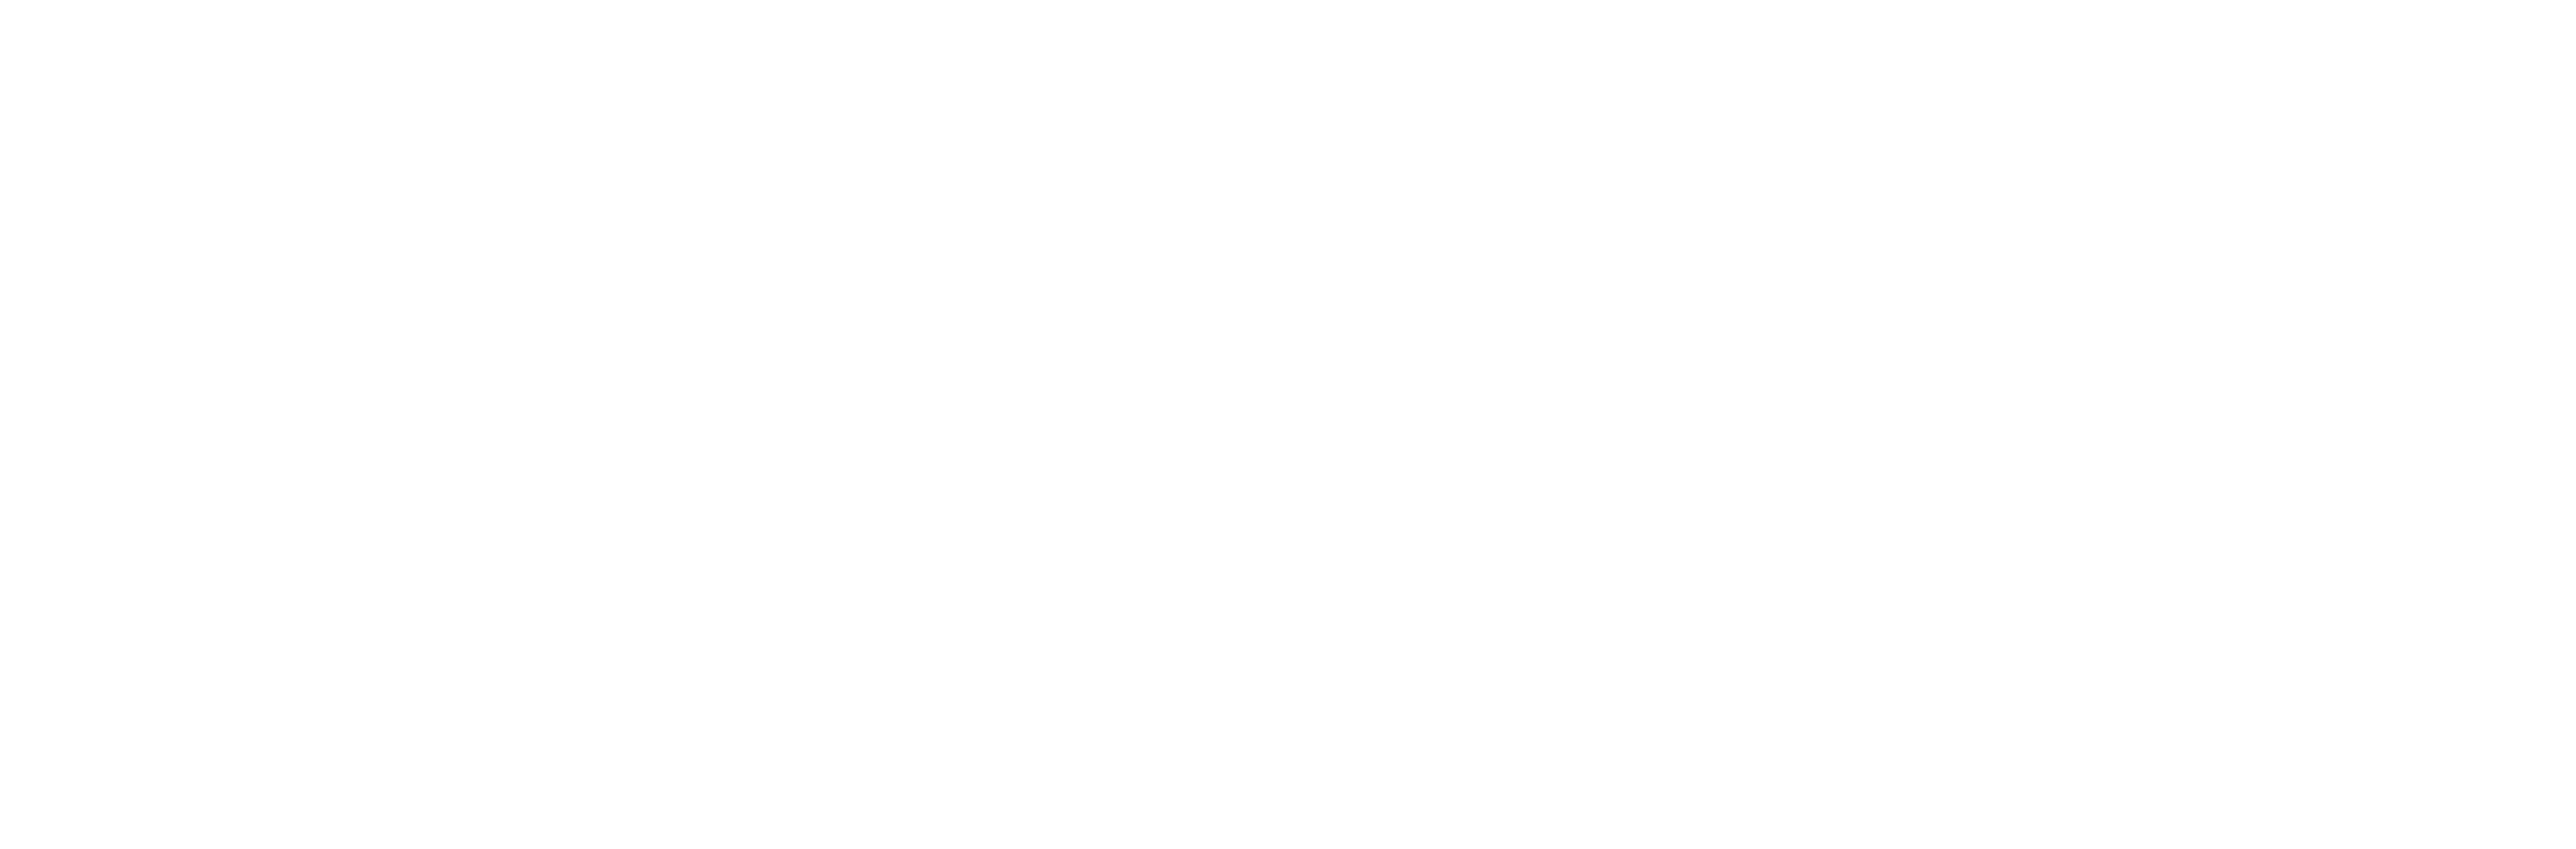 We Own the Night logo